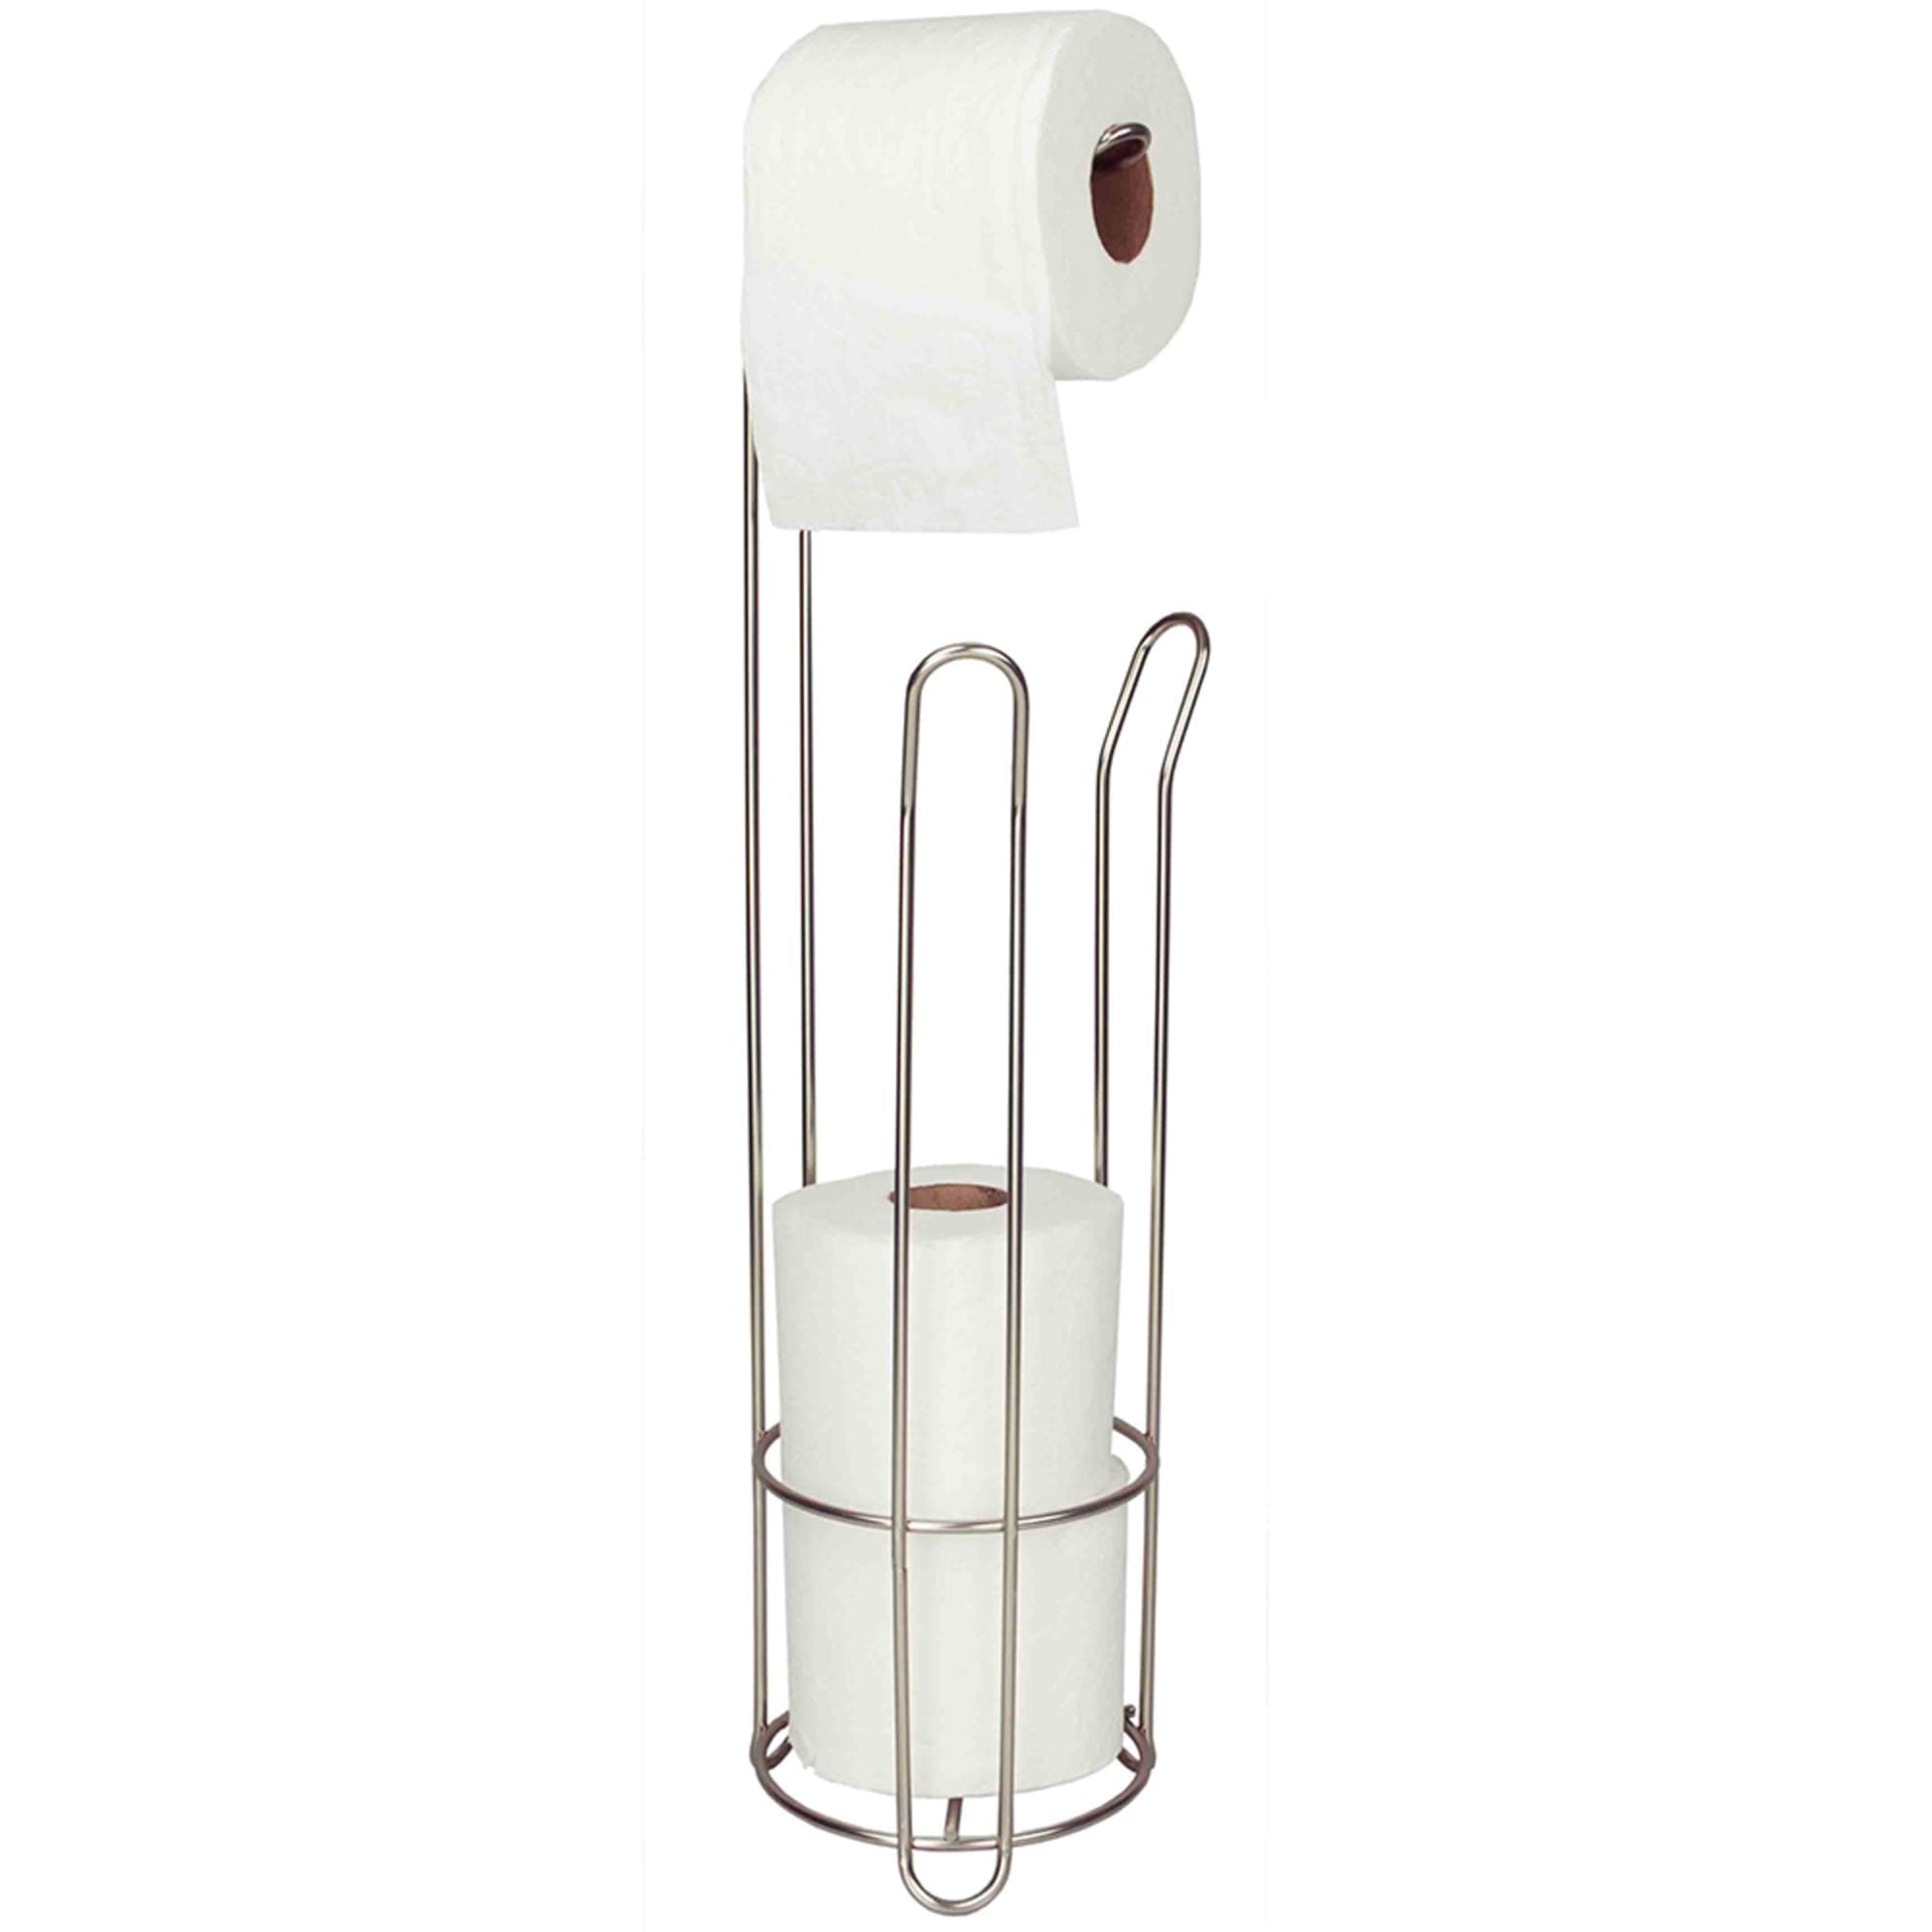 Free-Standing Toilet Paper Roll Holder, No Assembly, Satin Nickel Finish -  NEW